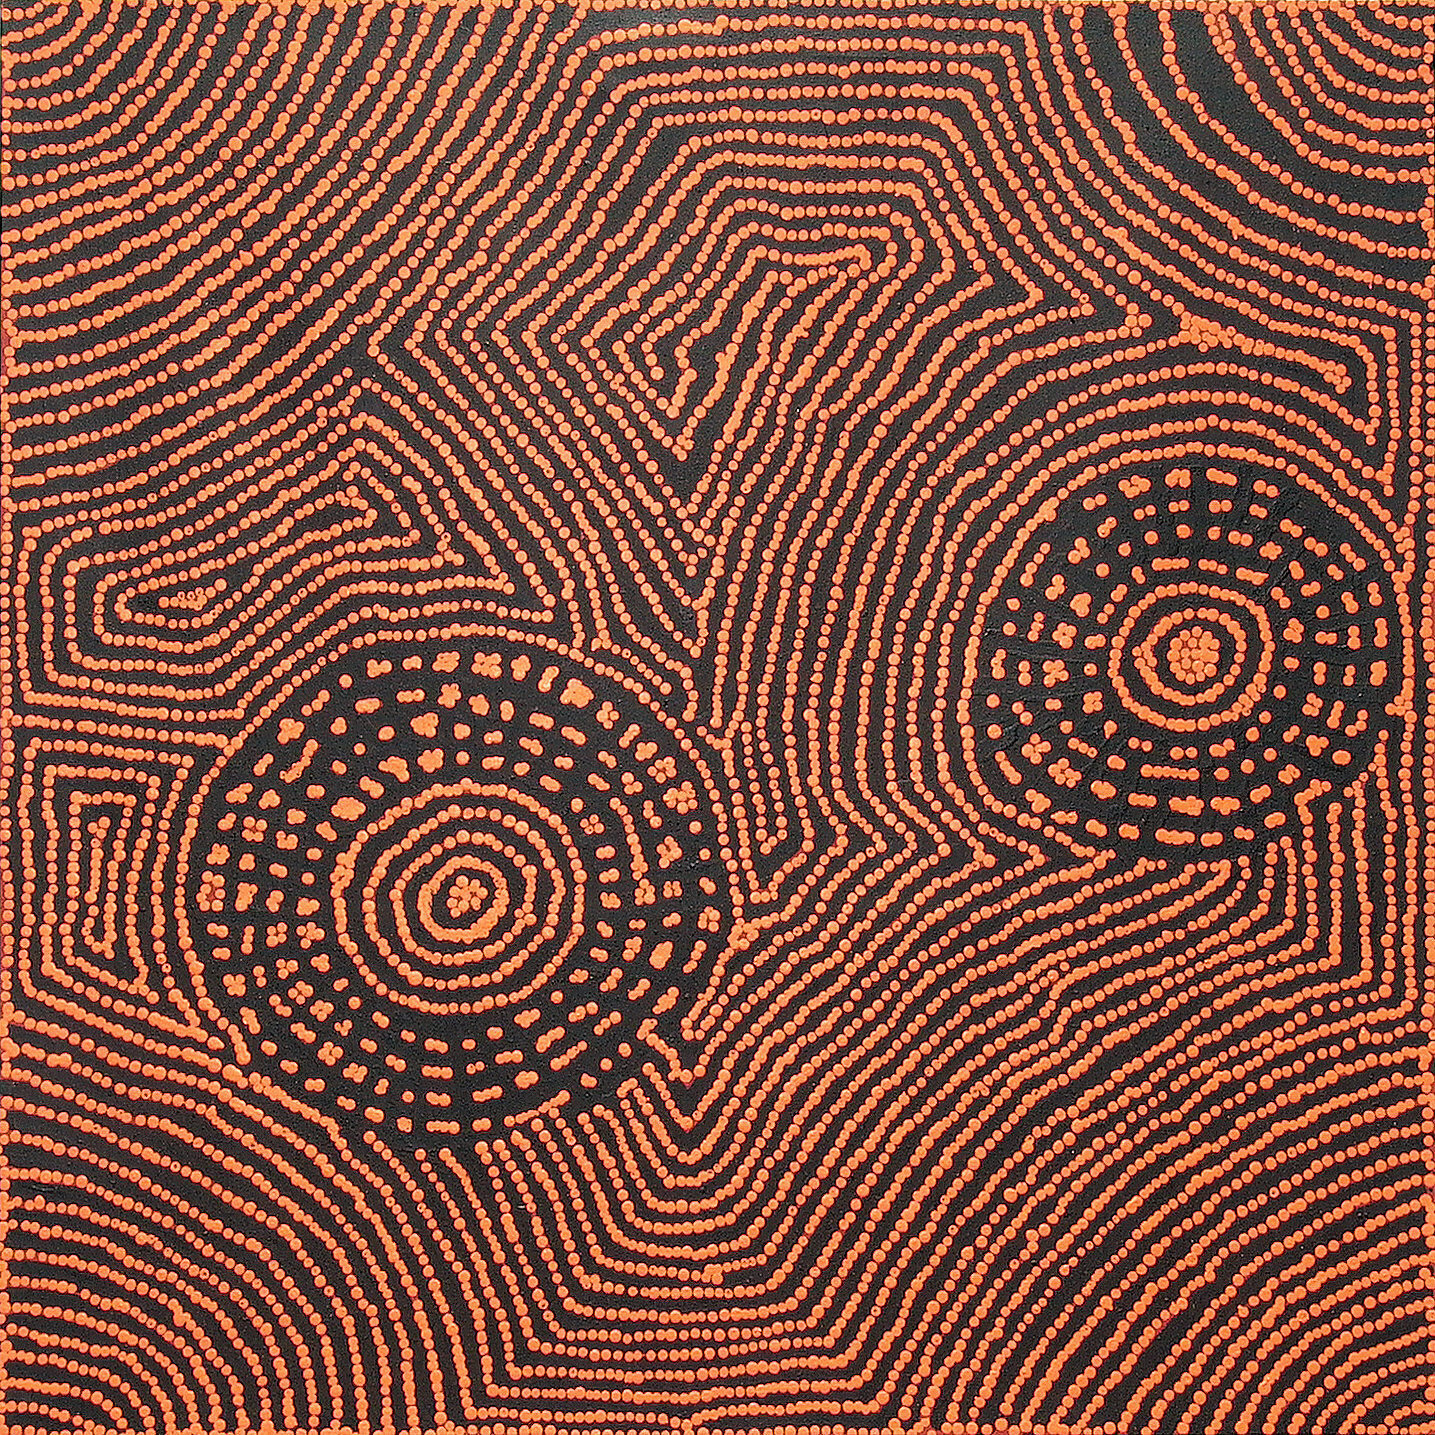 Tingari Cycle (2005) by Barney Campbell Tjakamarra 91x91cm Cat 9457BC